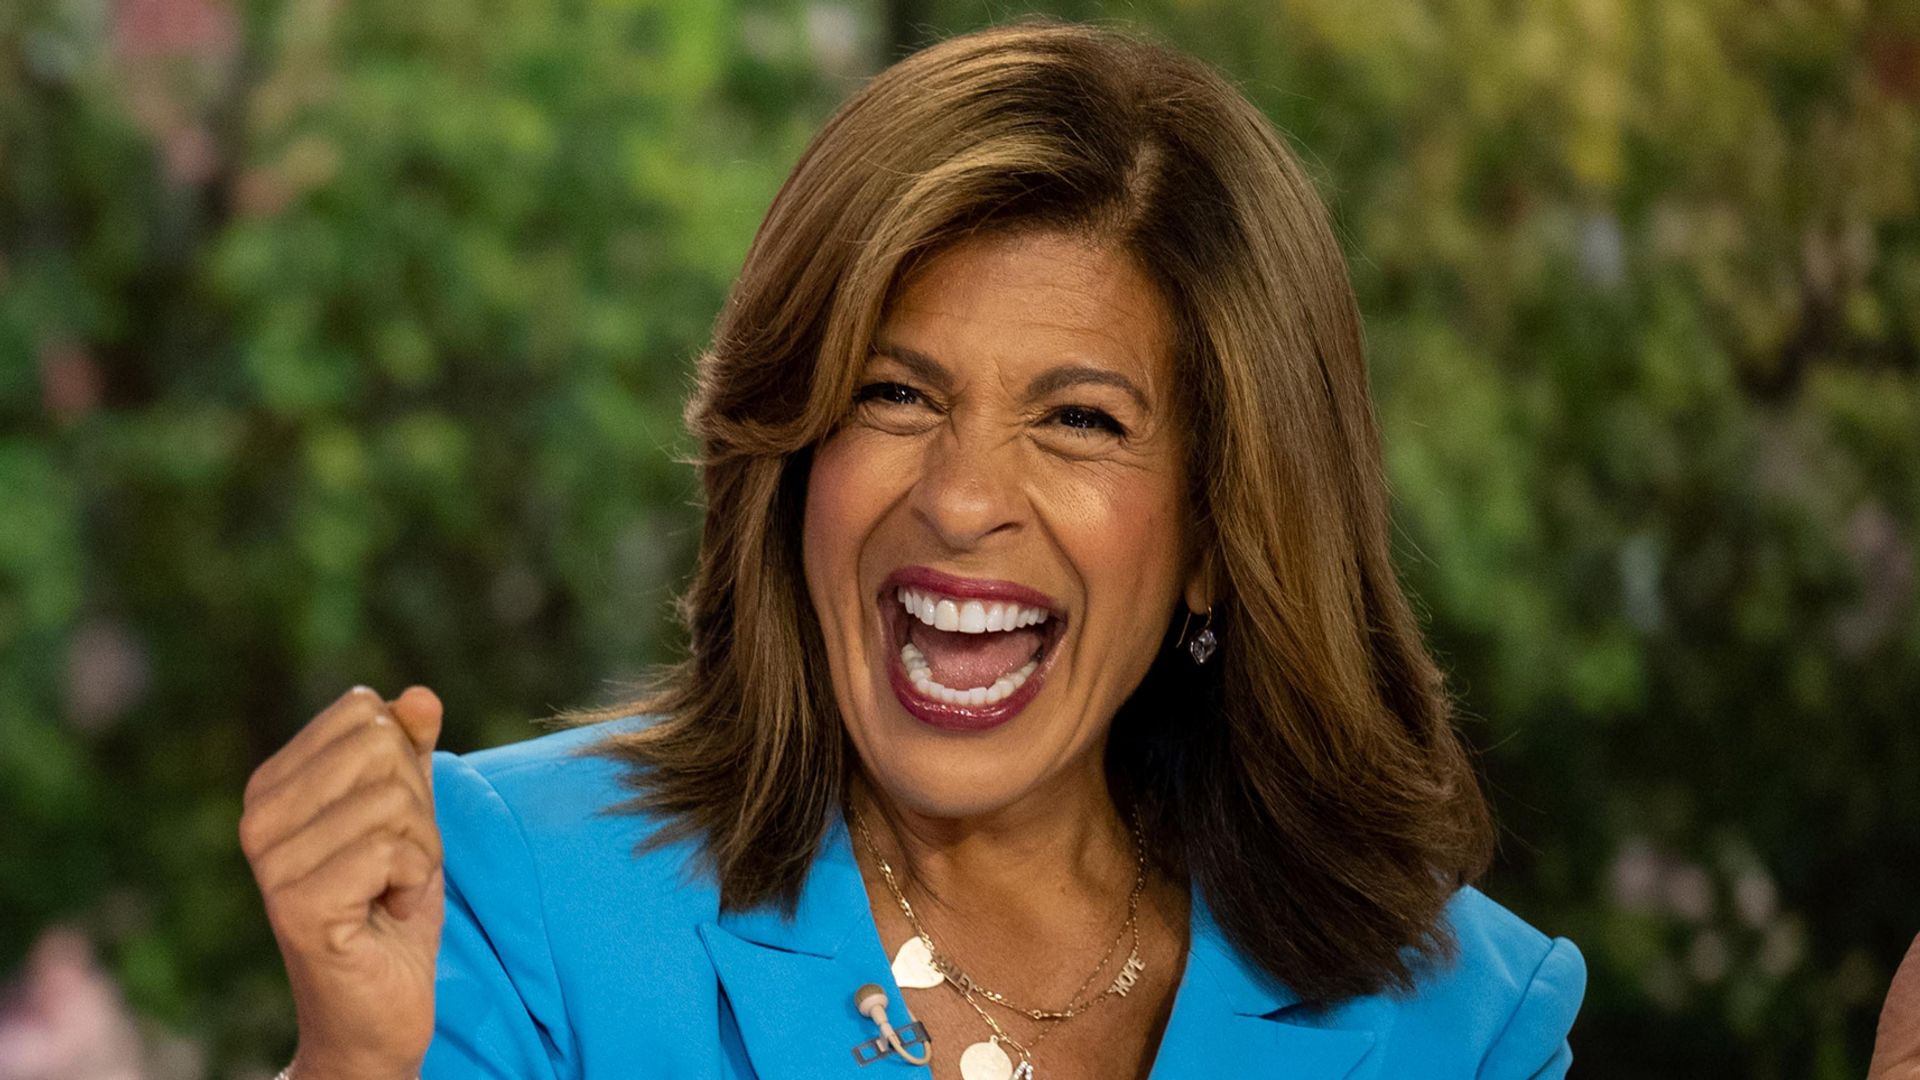 Hoda Kotb in blue outfit